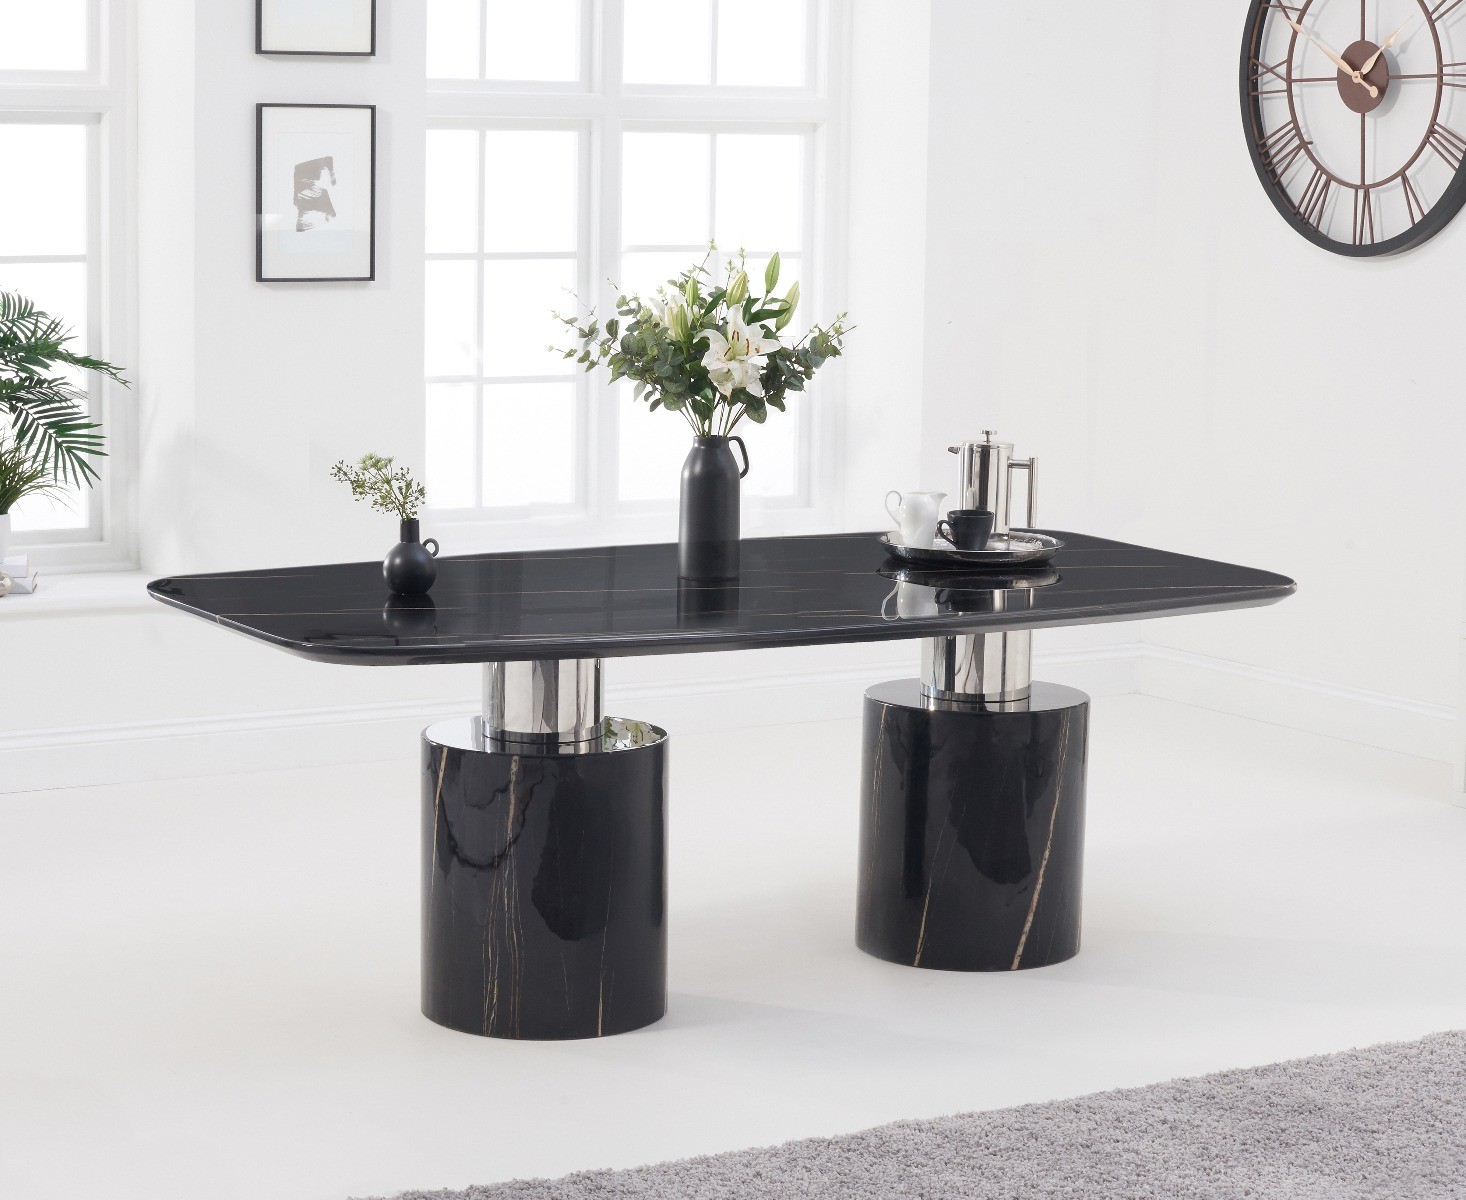 Photo 3 of Antonio 180cm black marble dining table with 8 grey francesca chairs